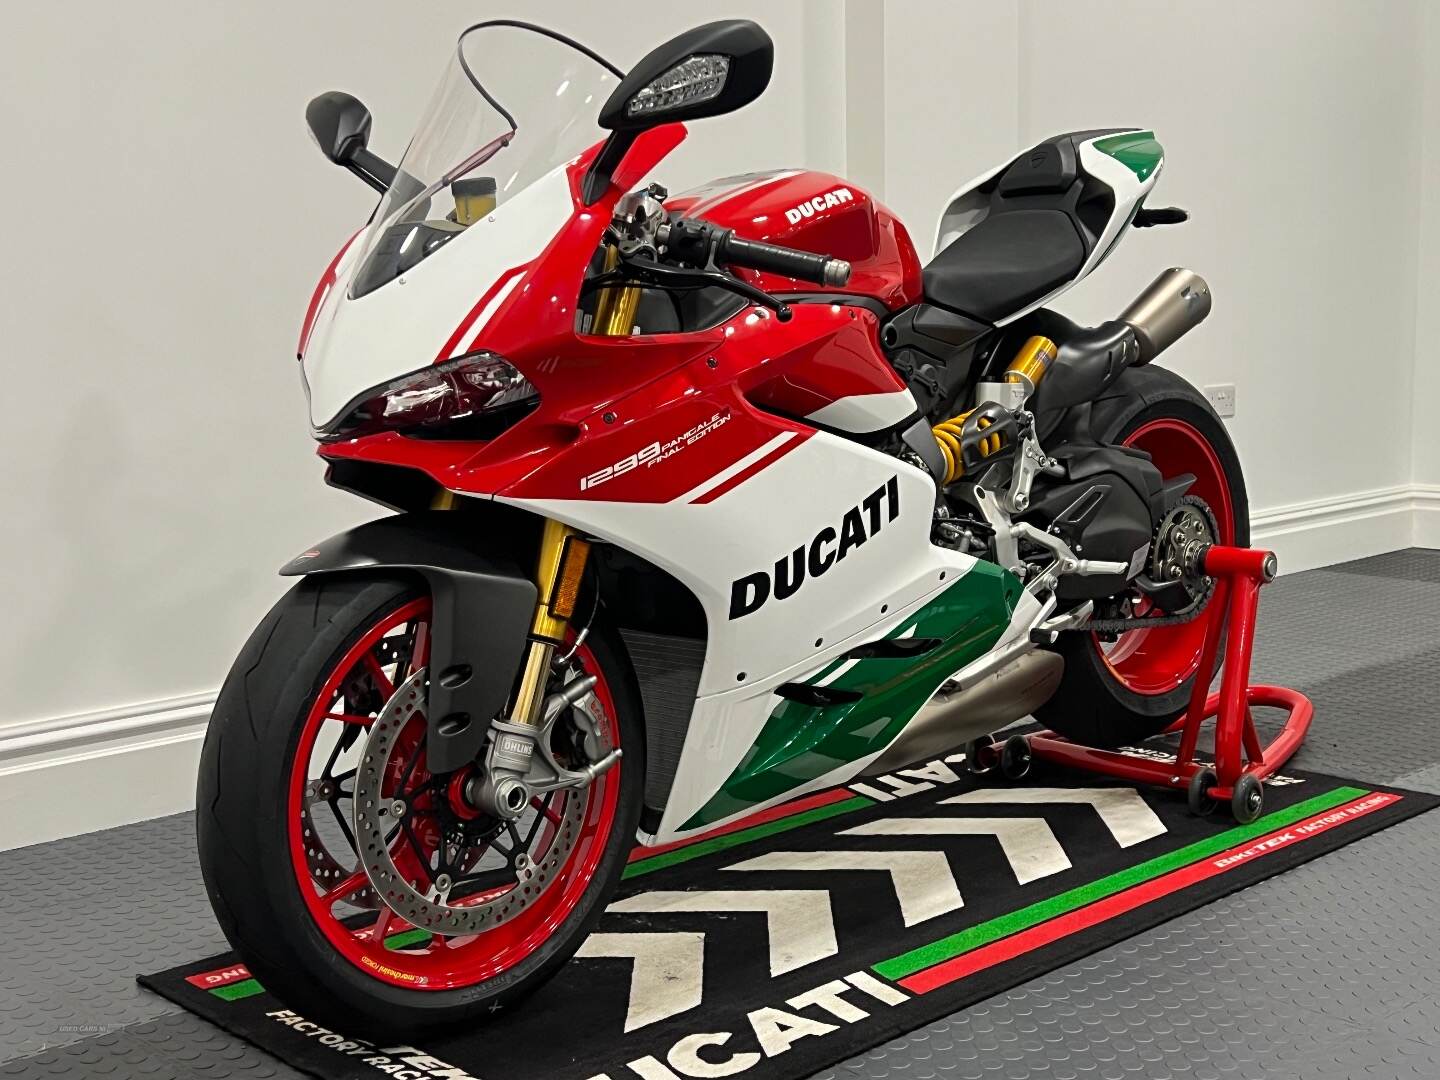 Ducati Panigale 1299r final edition in Down